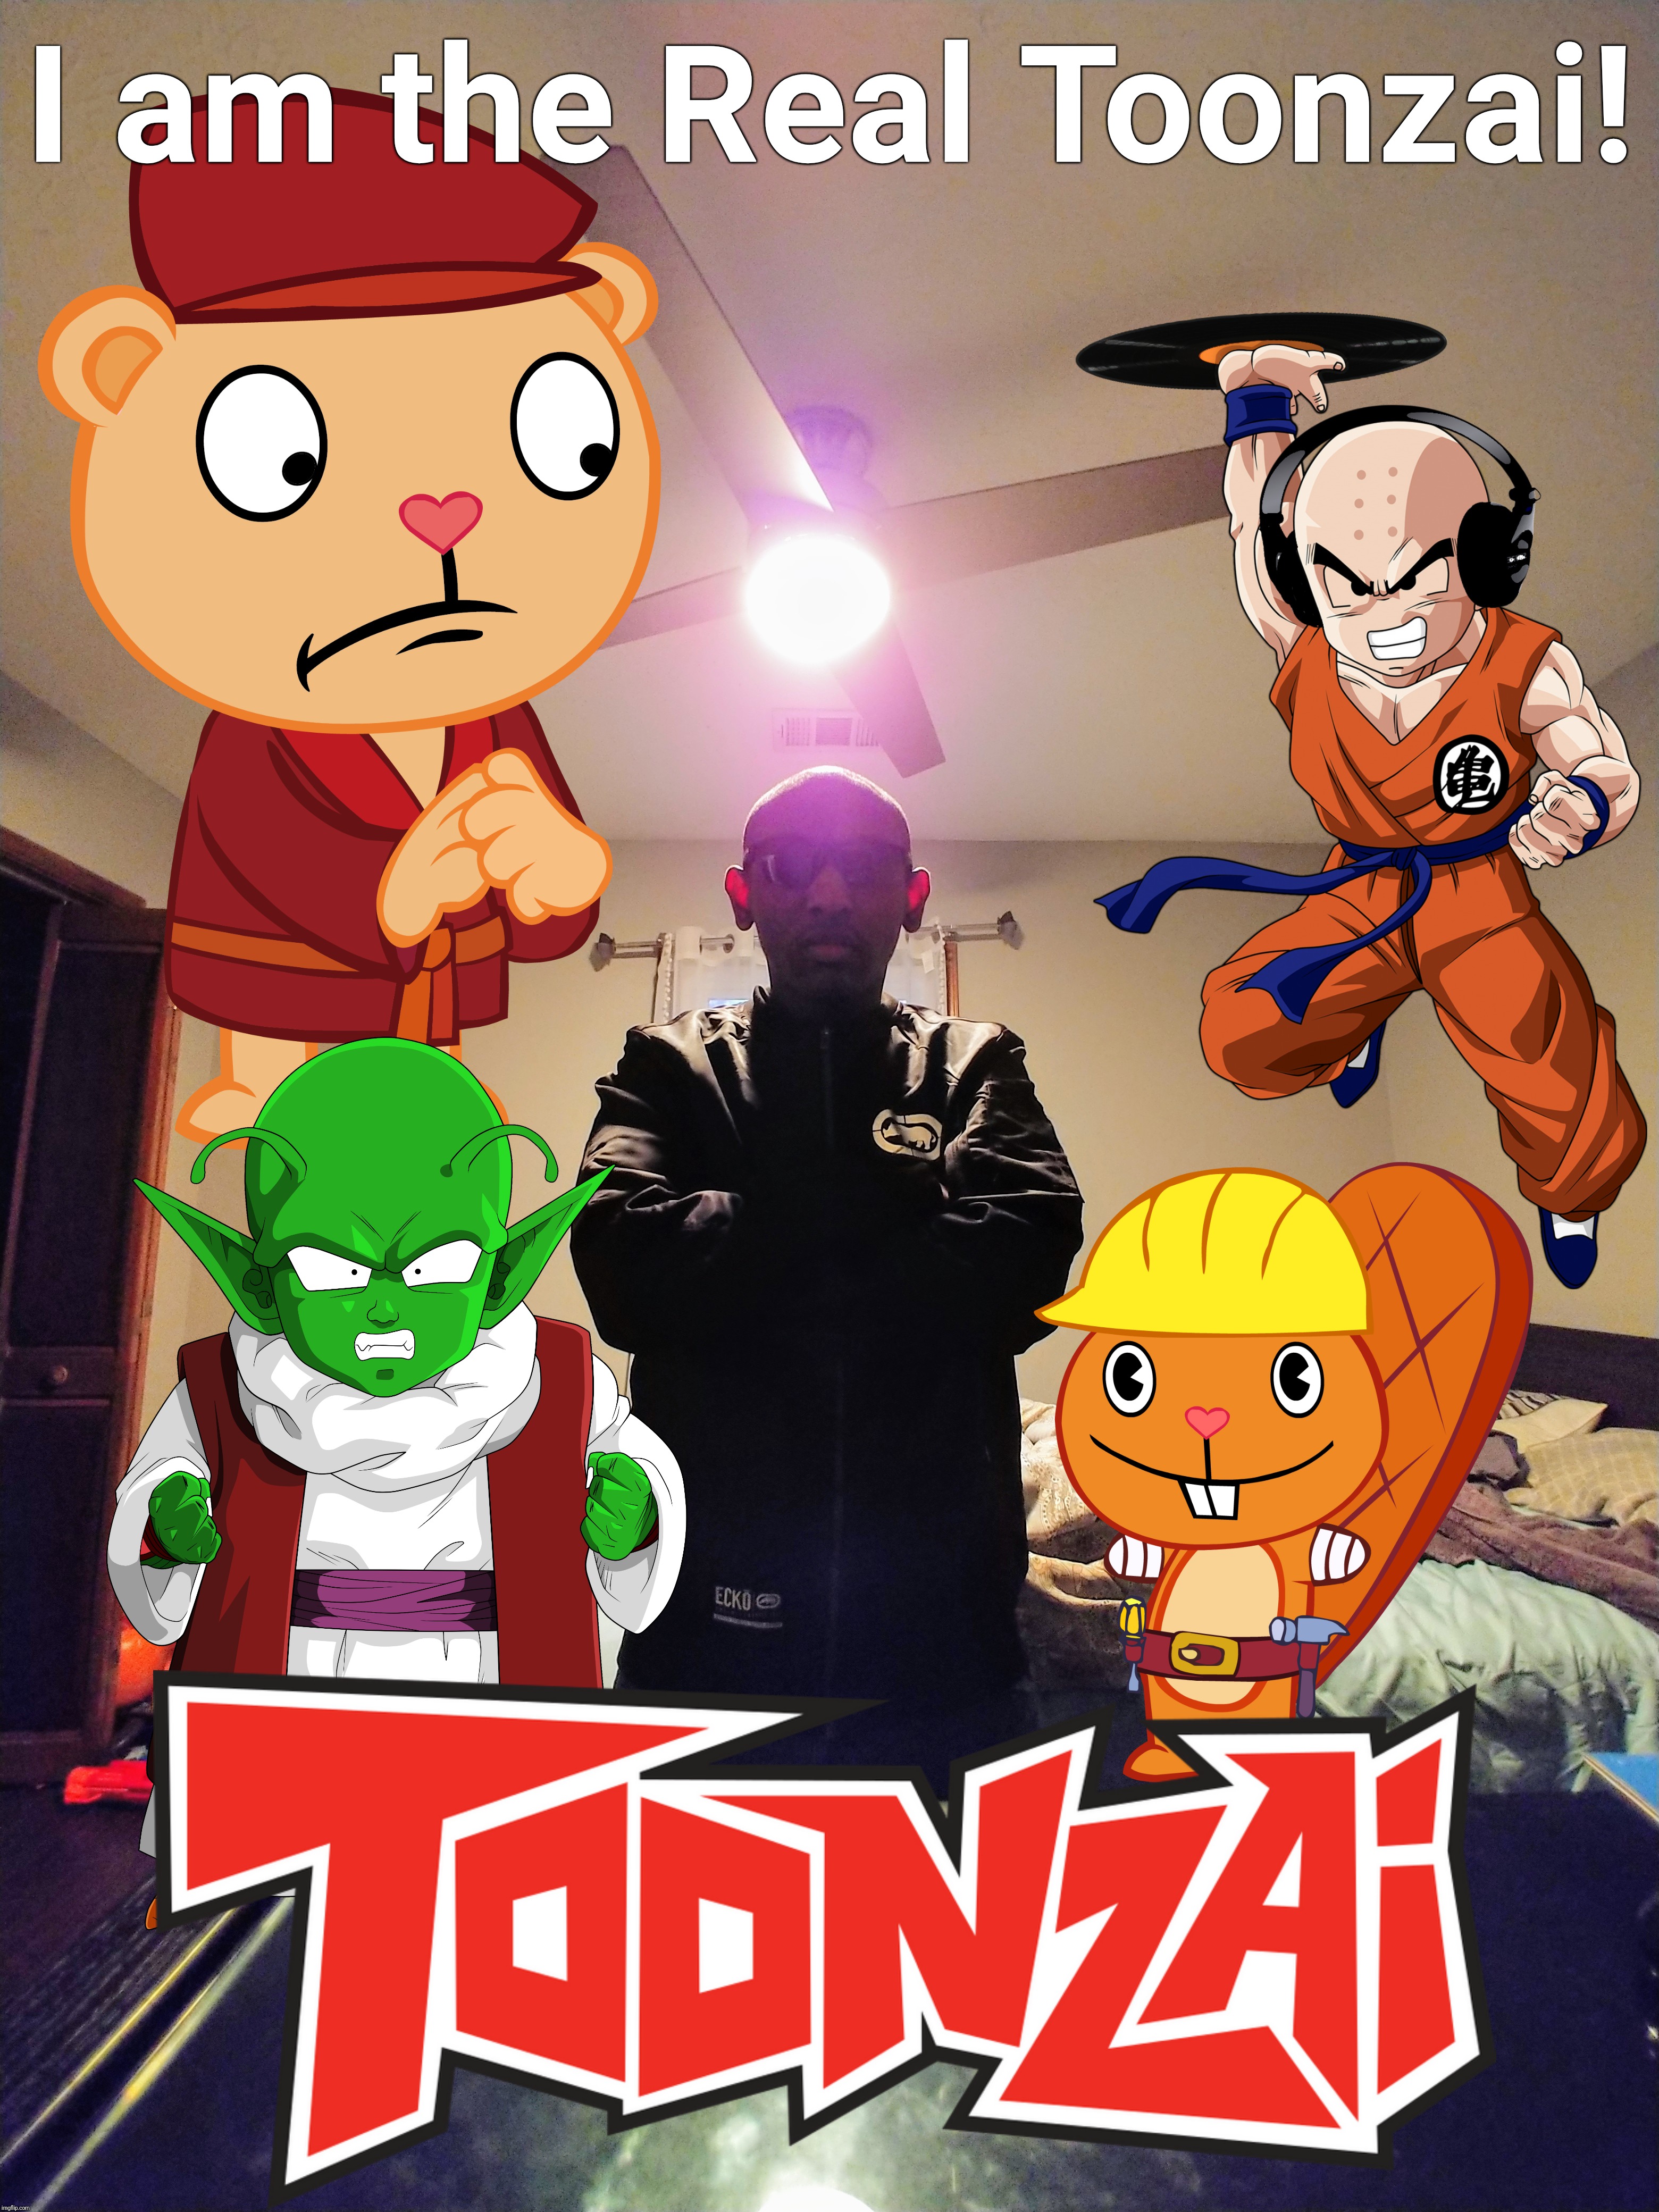 The Real Toonzai is Here! | I am the Real Toonzai! | image tagged in happy tree friends,selfie,toonzai | made w/ Imgflip meme maker